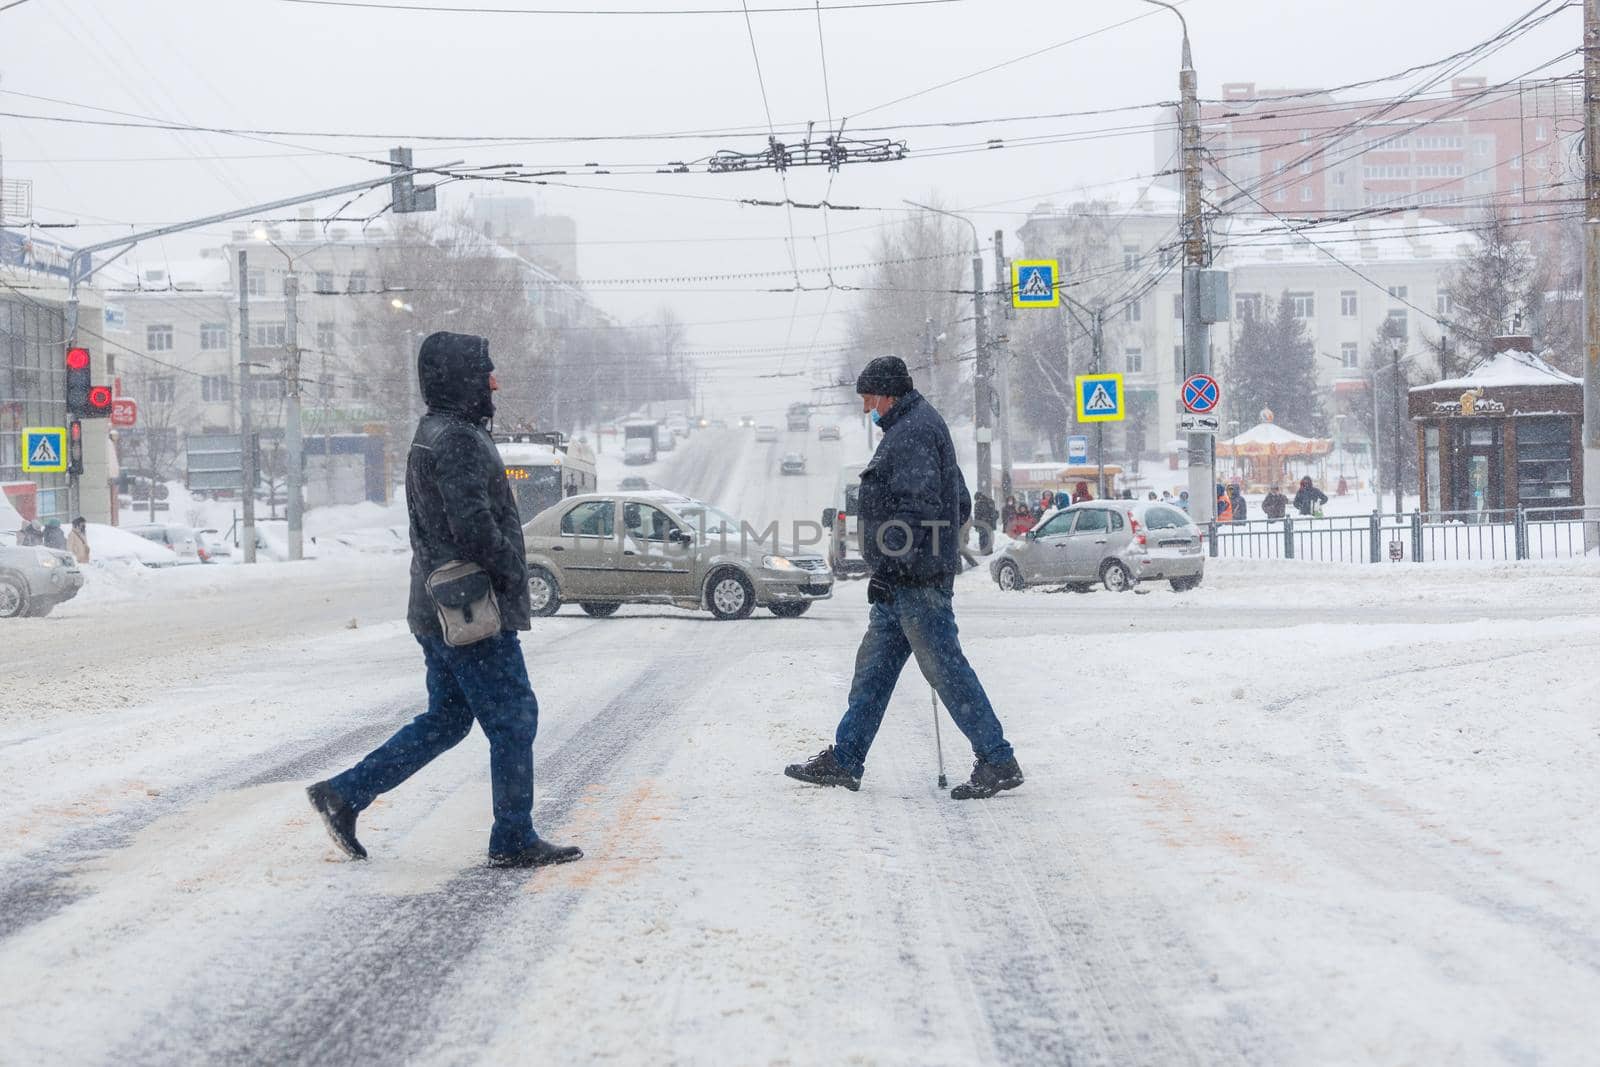 Tula, Russia - February 13, 2020: Two men crossing city road during heavy snow fall at day light.